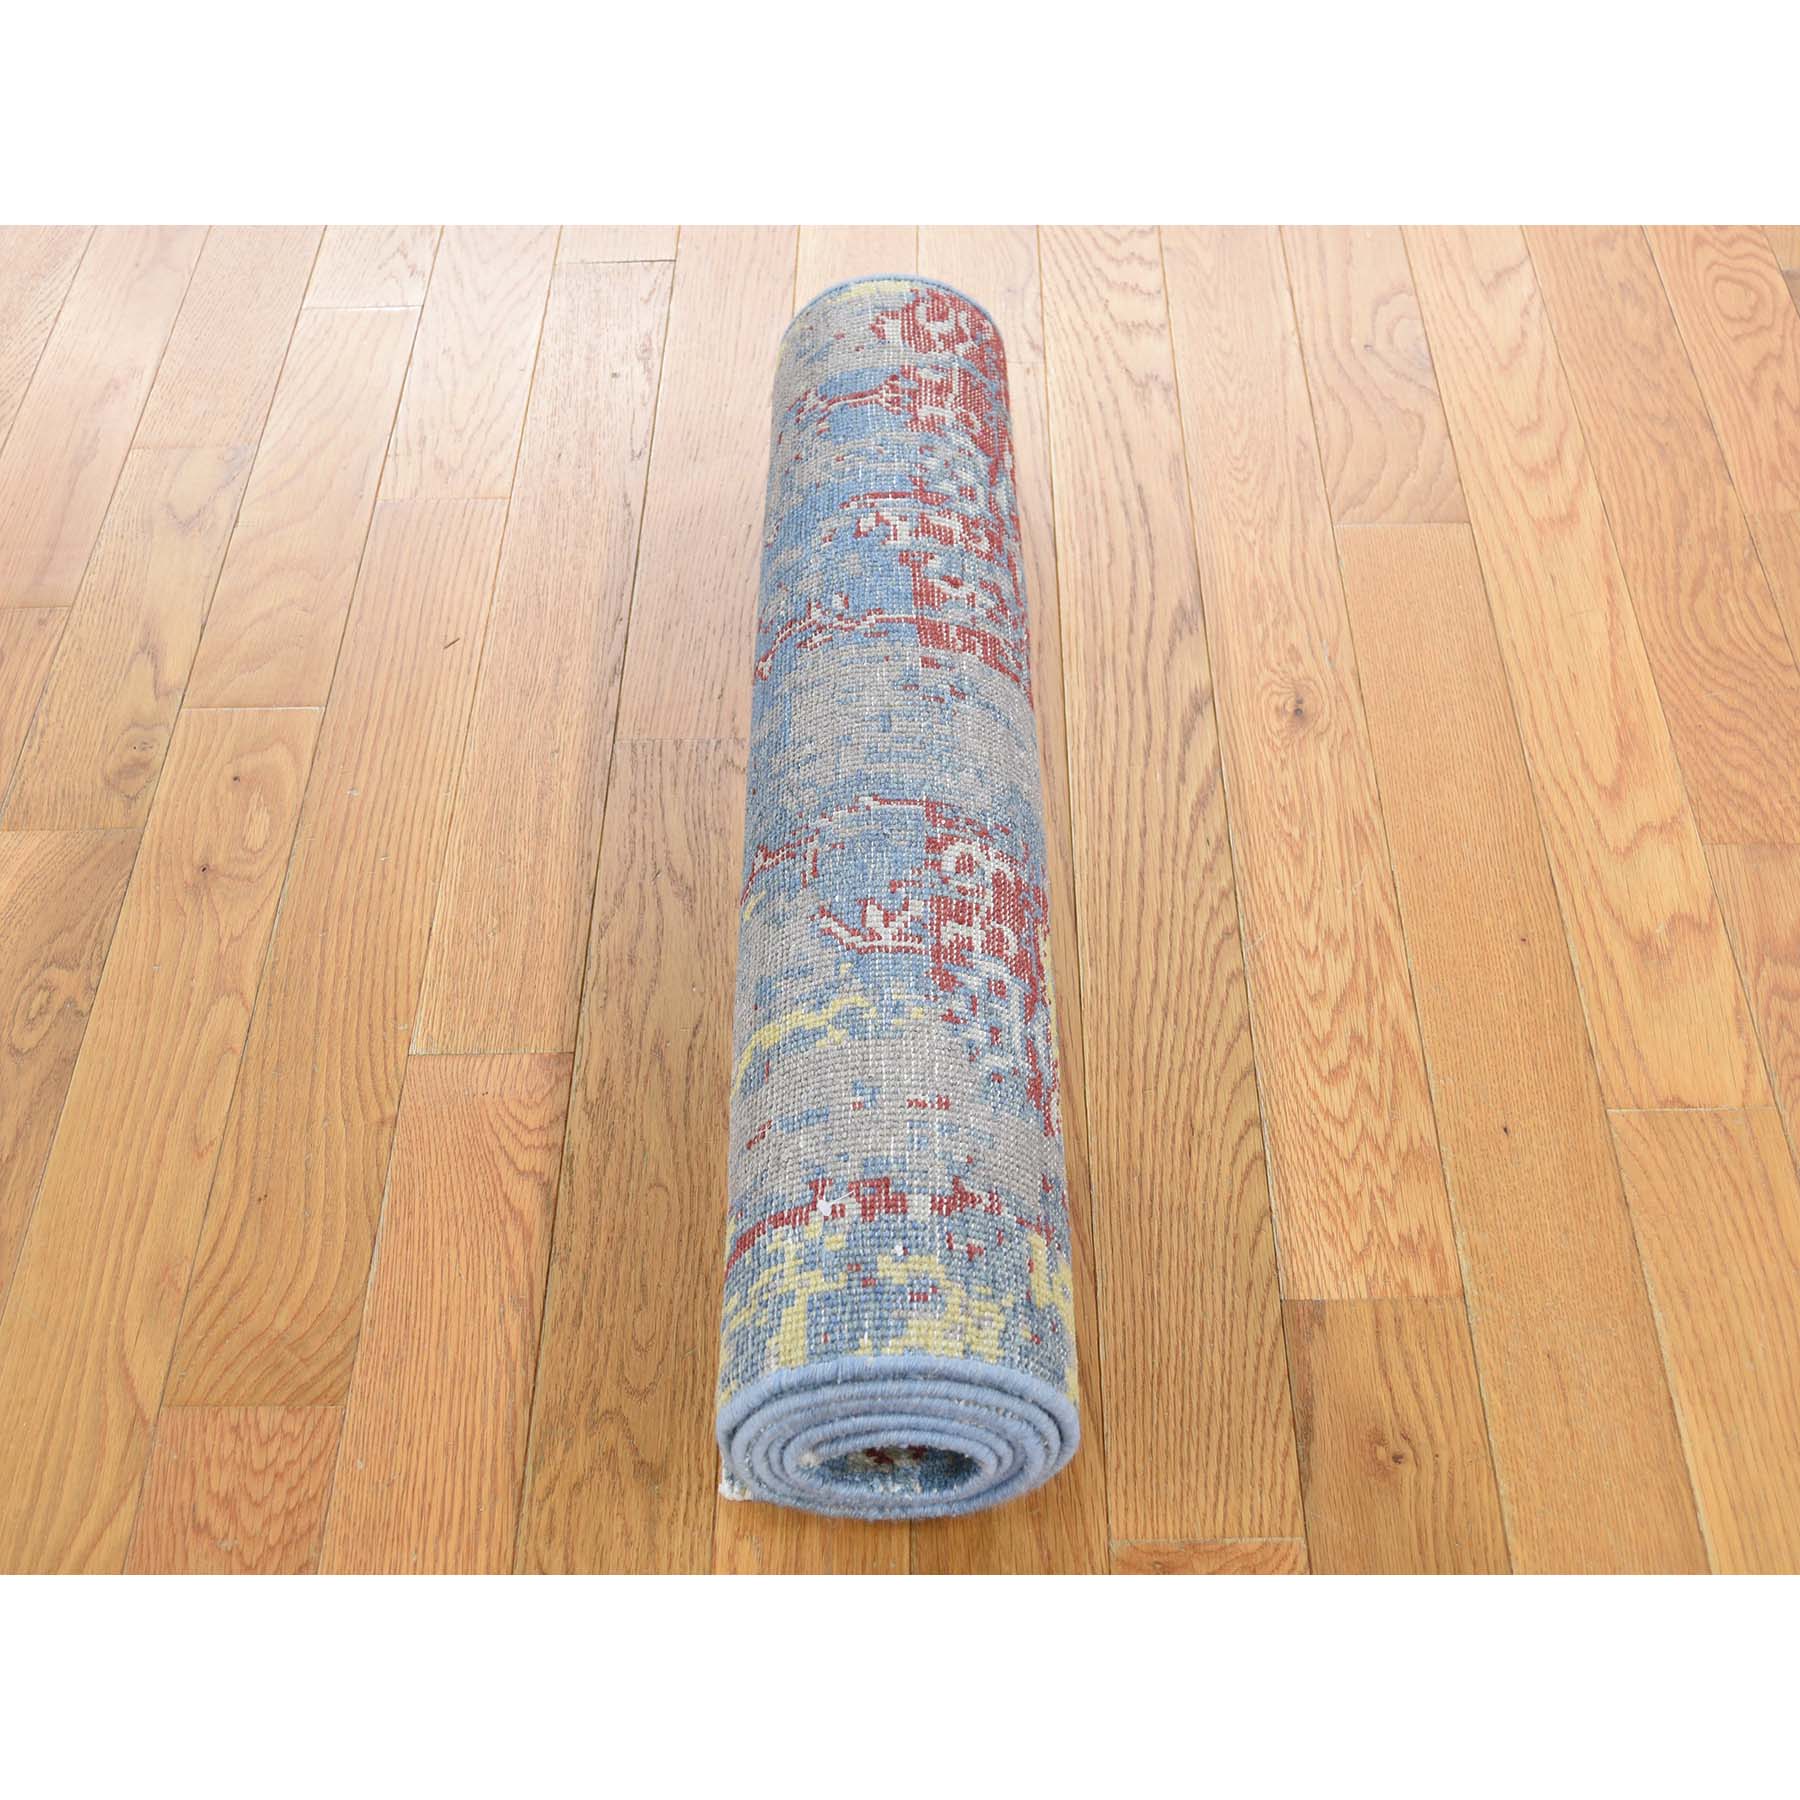 2-5 x6- Hand-Knotted Silk With Oxidized Wool Broken Design Runner Rug 